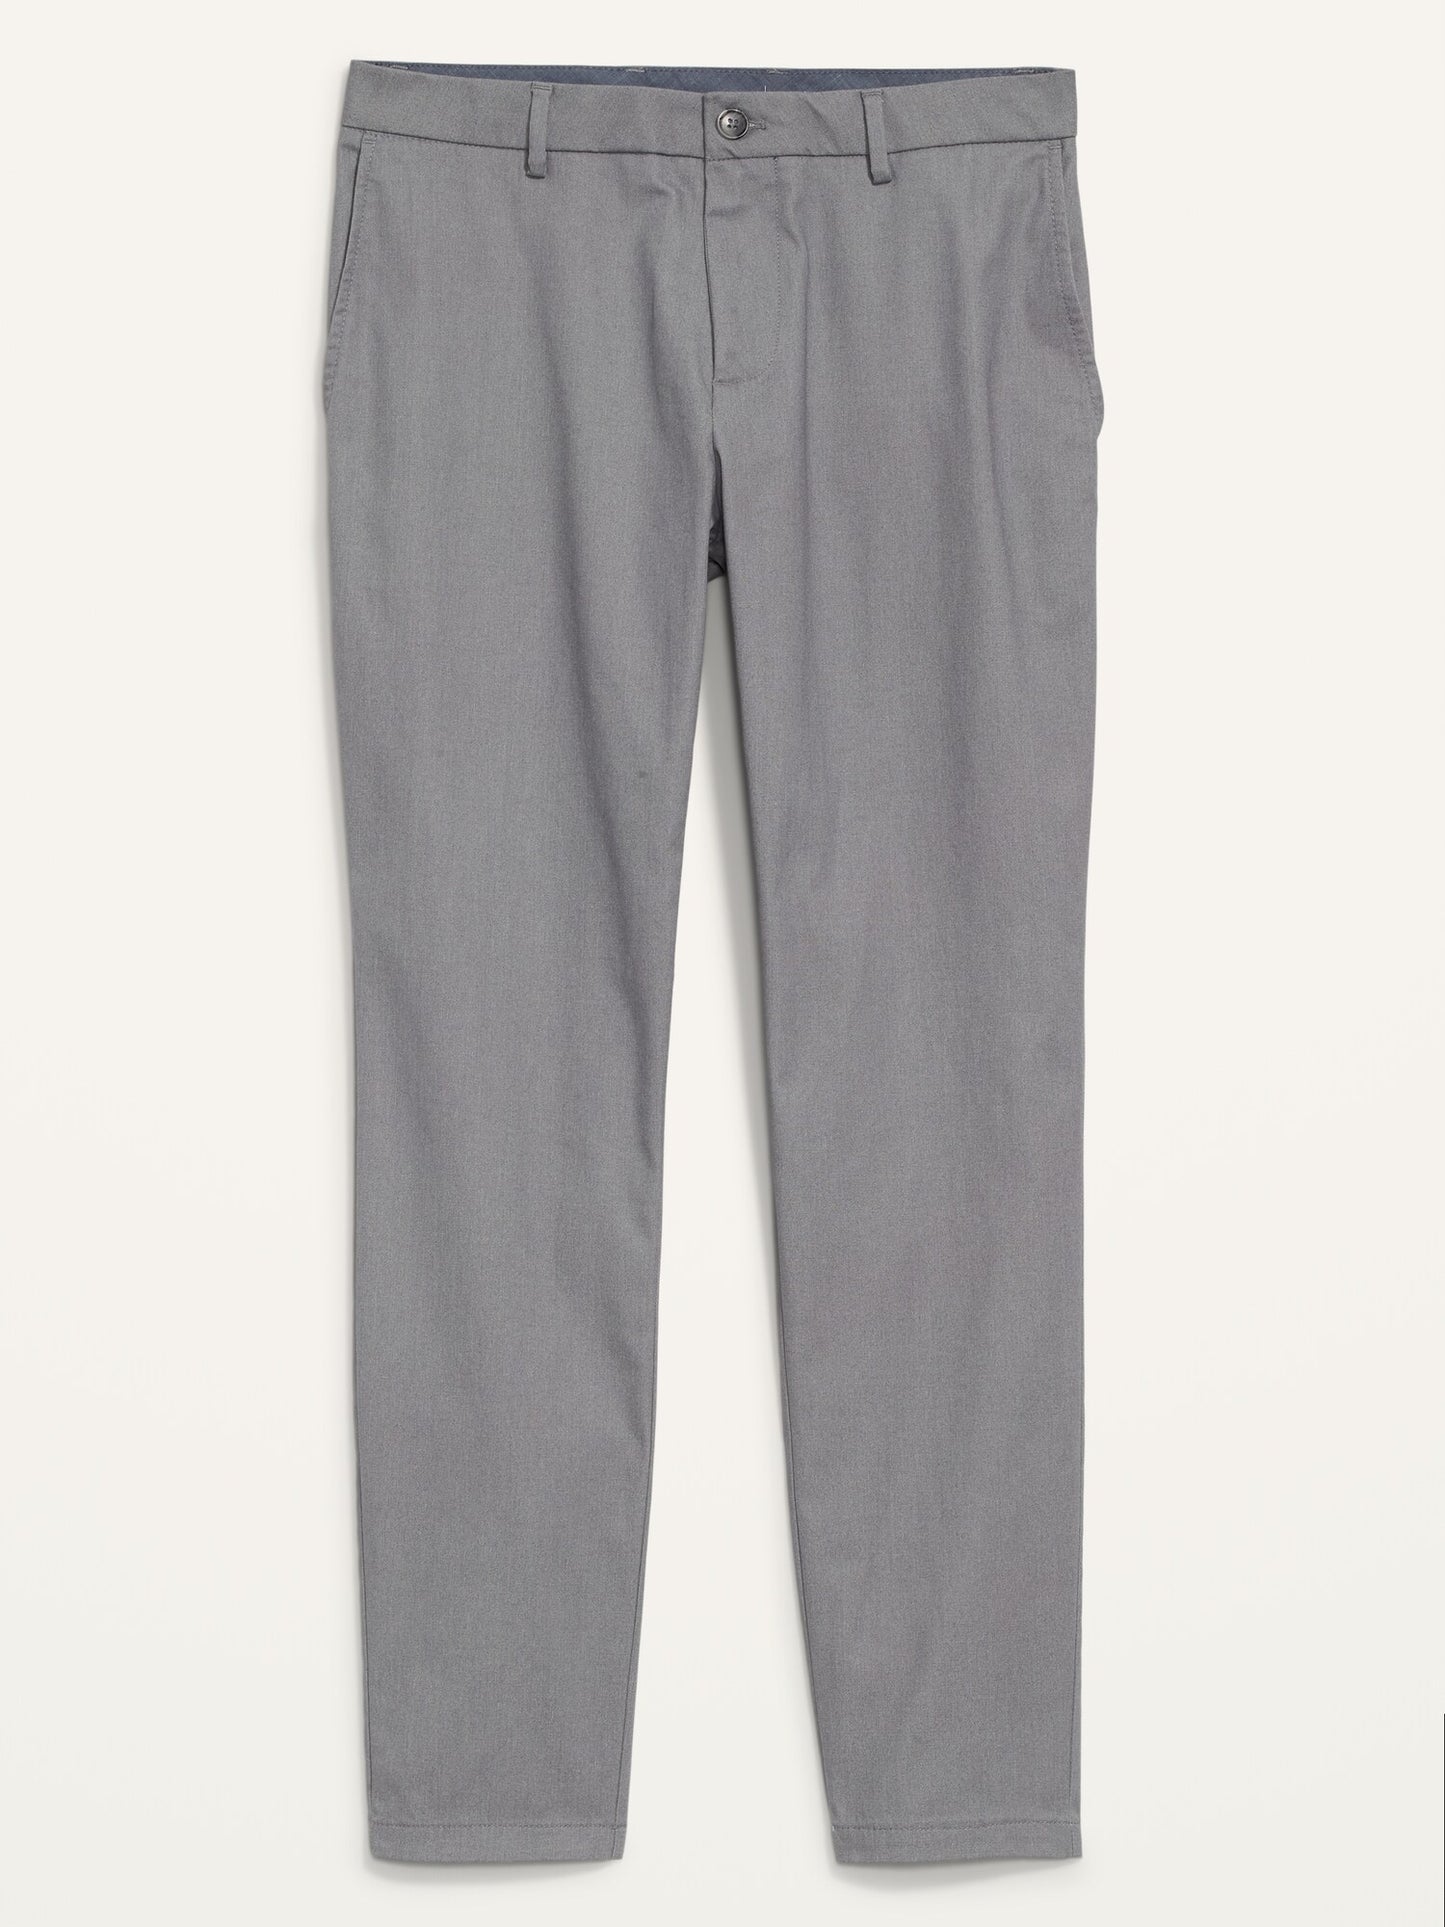 ON Athletic Ultimate Built-In Flex Chino Pants For Men - Light Grey